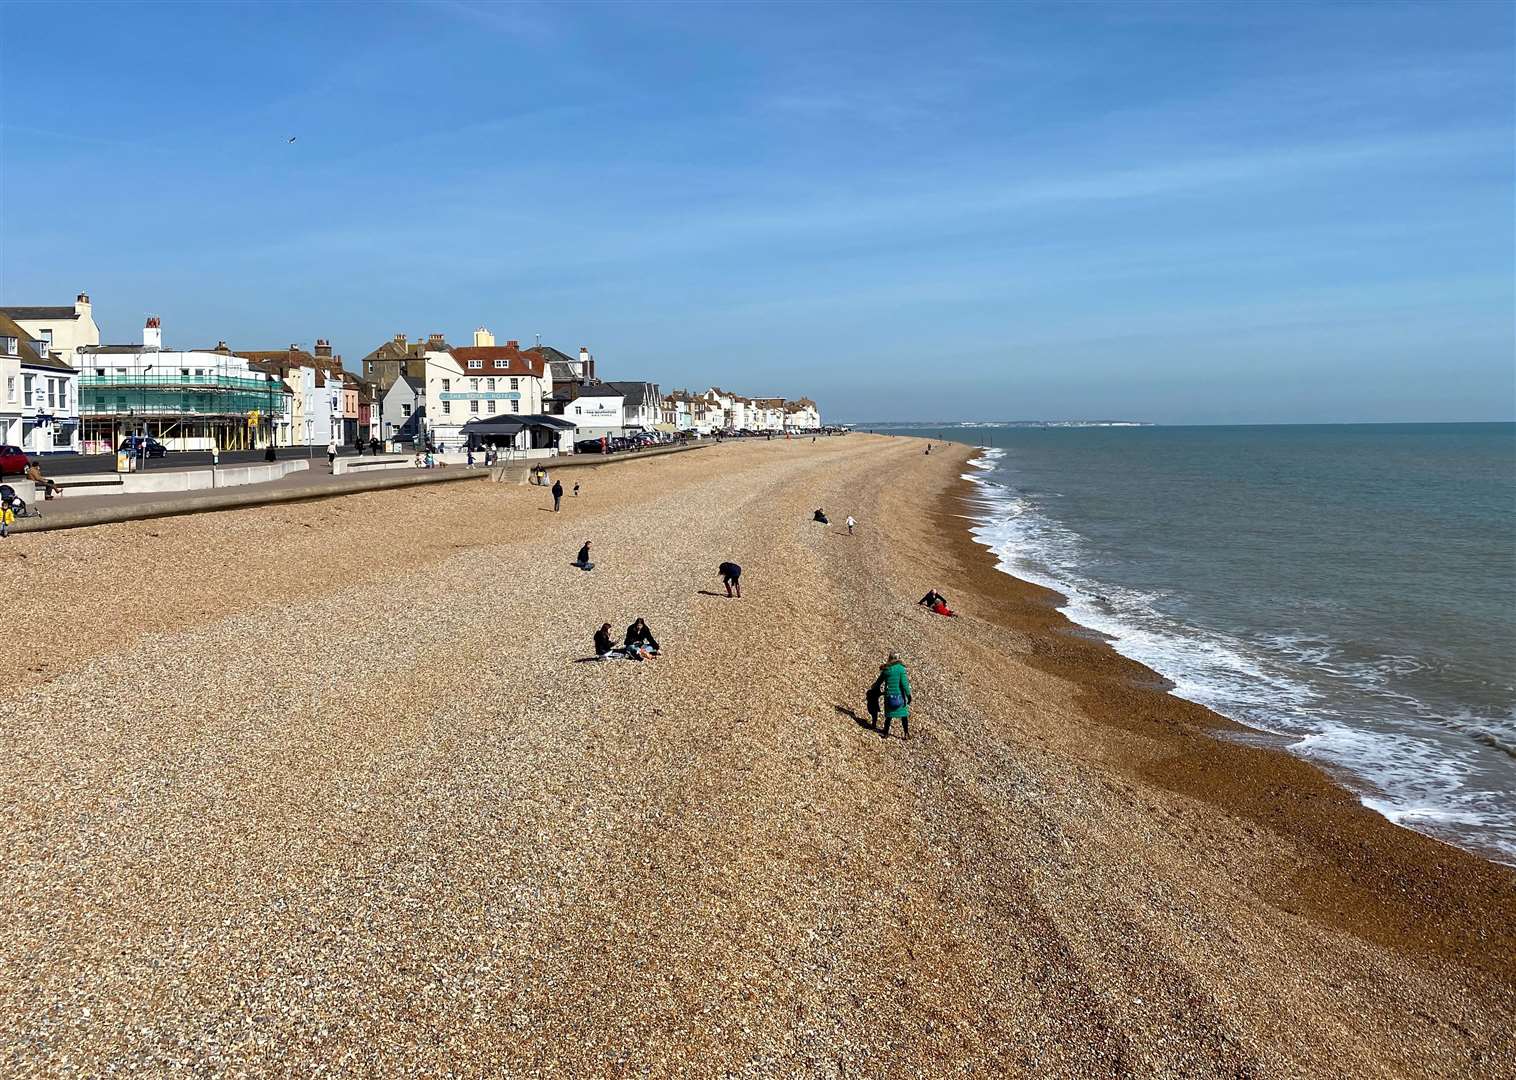 Deal beach will be reinforced after a £500,000 grant from the Environment Agency was approved